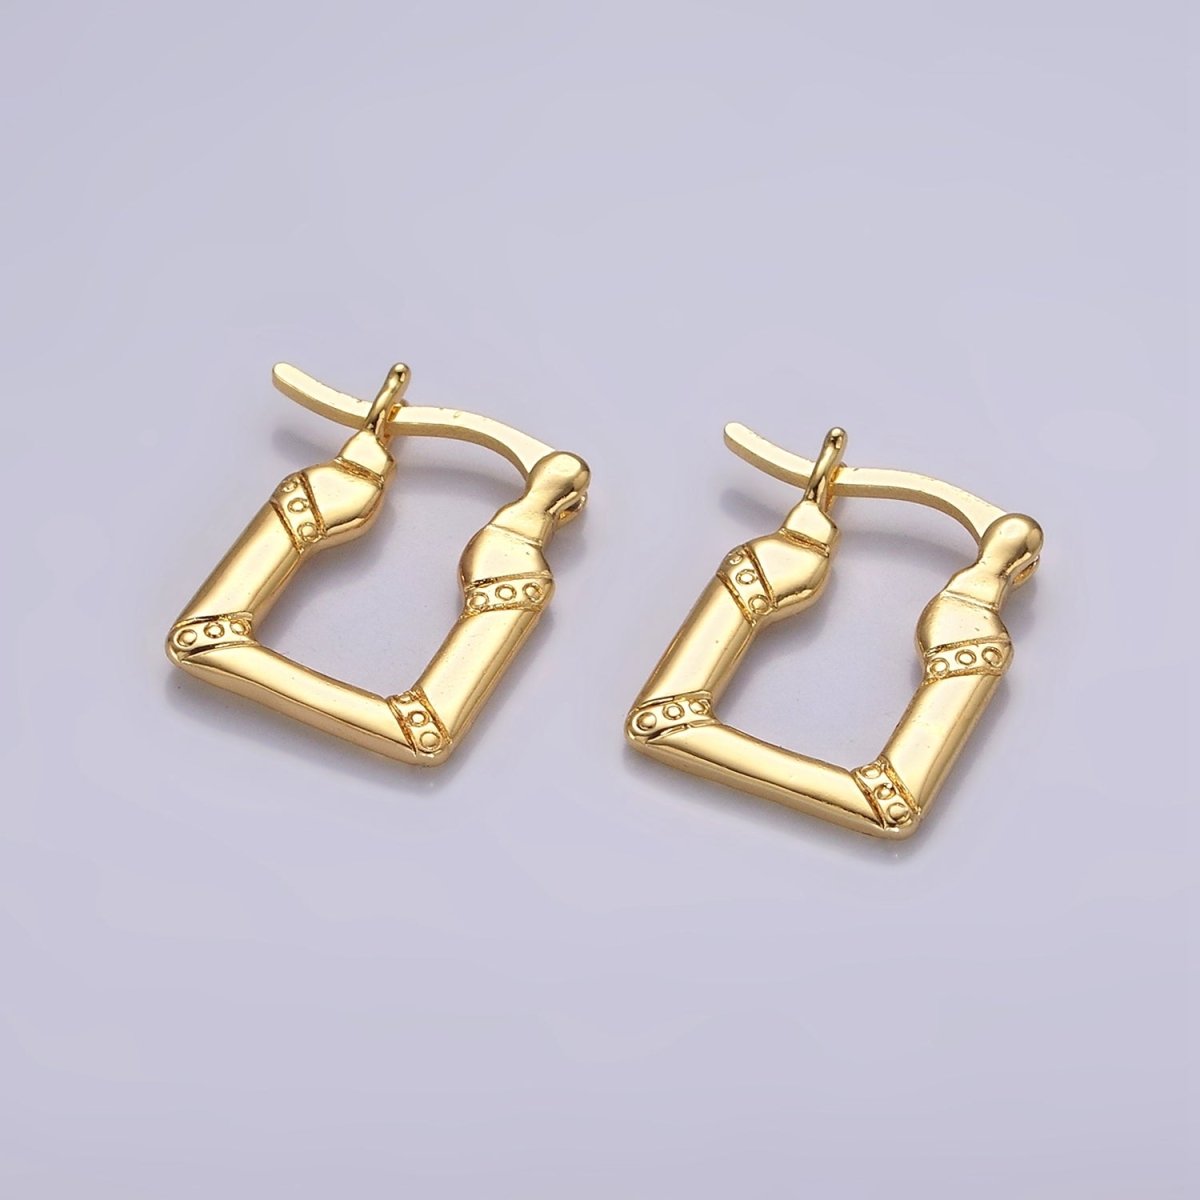 OS 14K Gold Filled 15mm Dotted Lined Square French Lock Latch Hoop Earrings | AE965 - DLUXCA